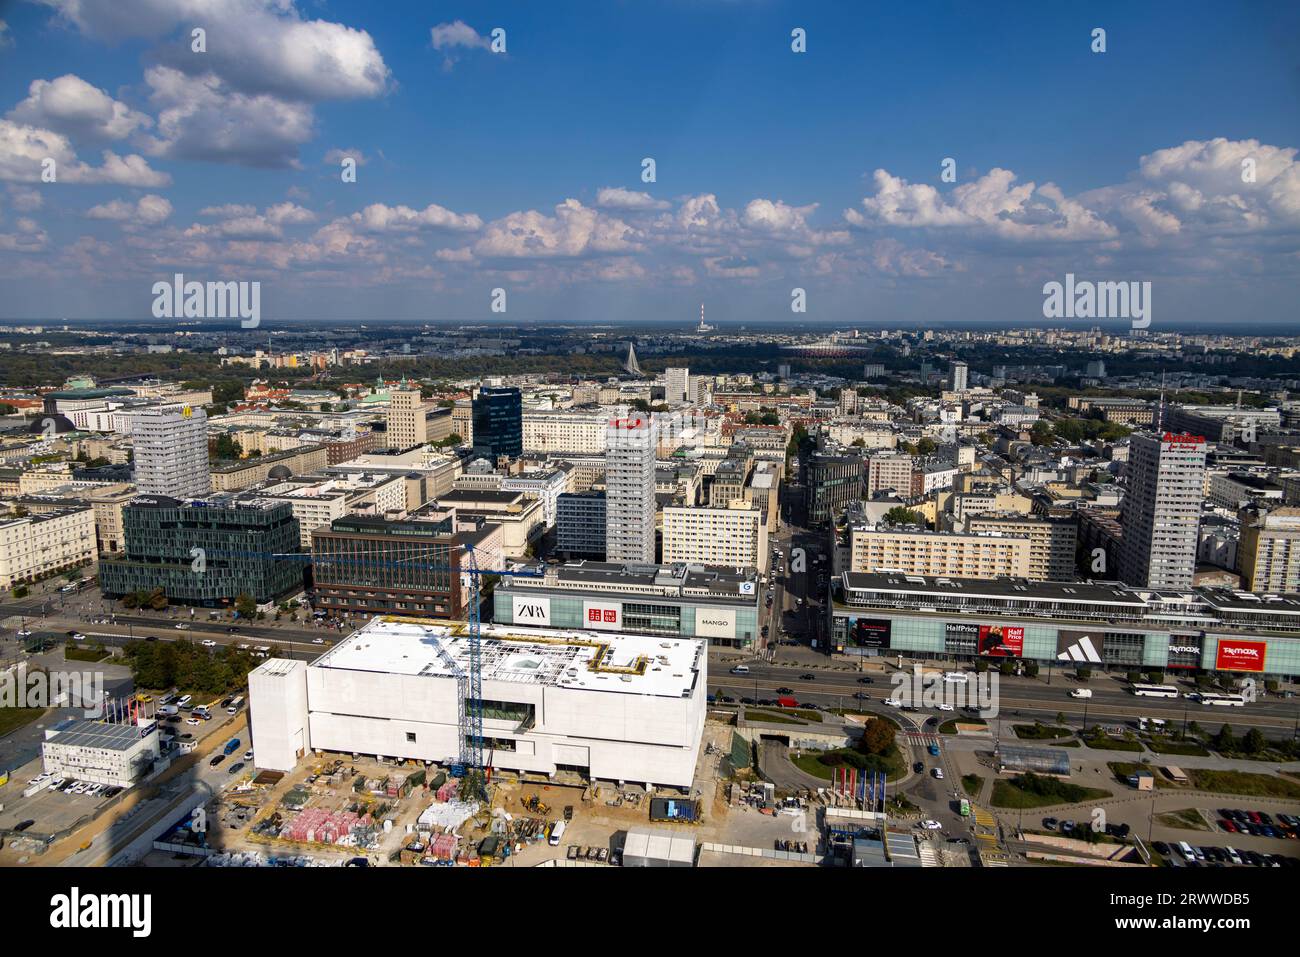 view towards east of center of city from the Palace of Culture, Warsaw, Poland Stock Photo